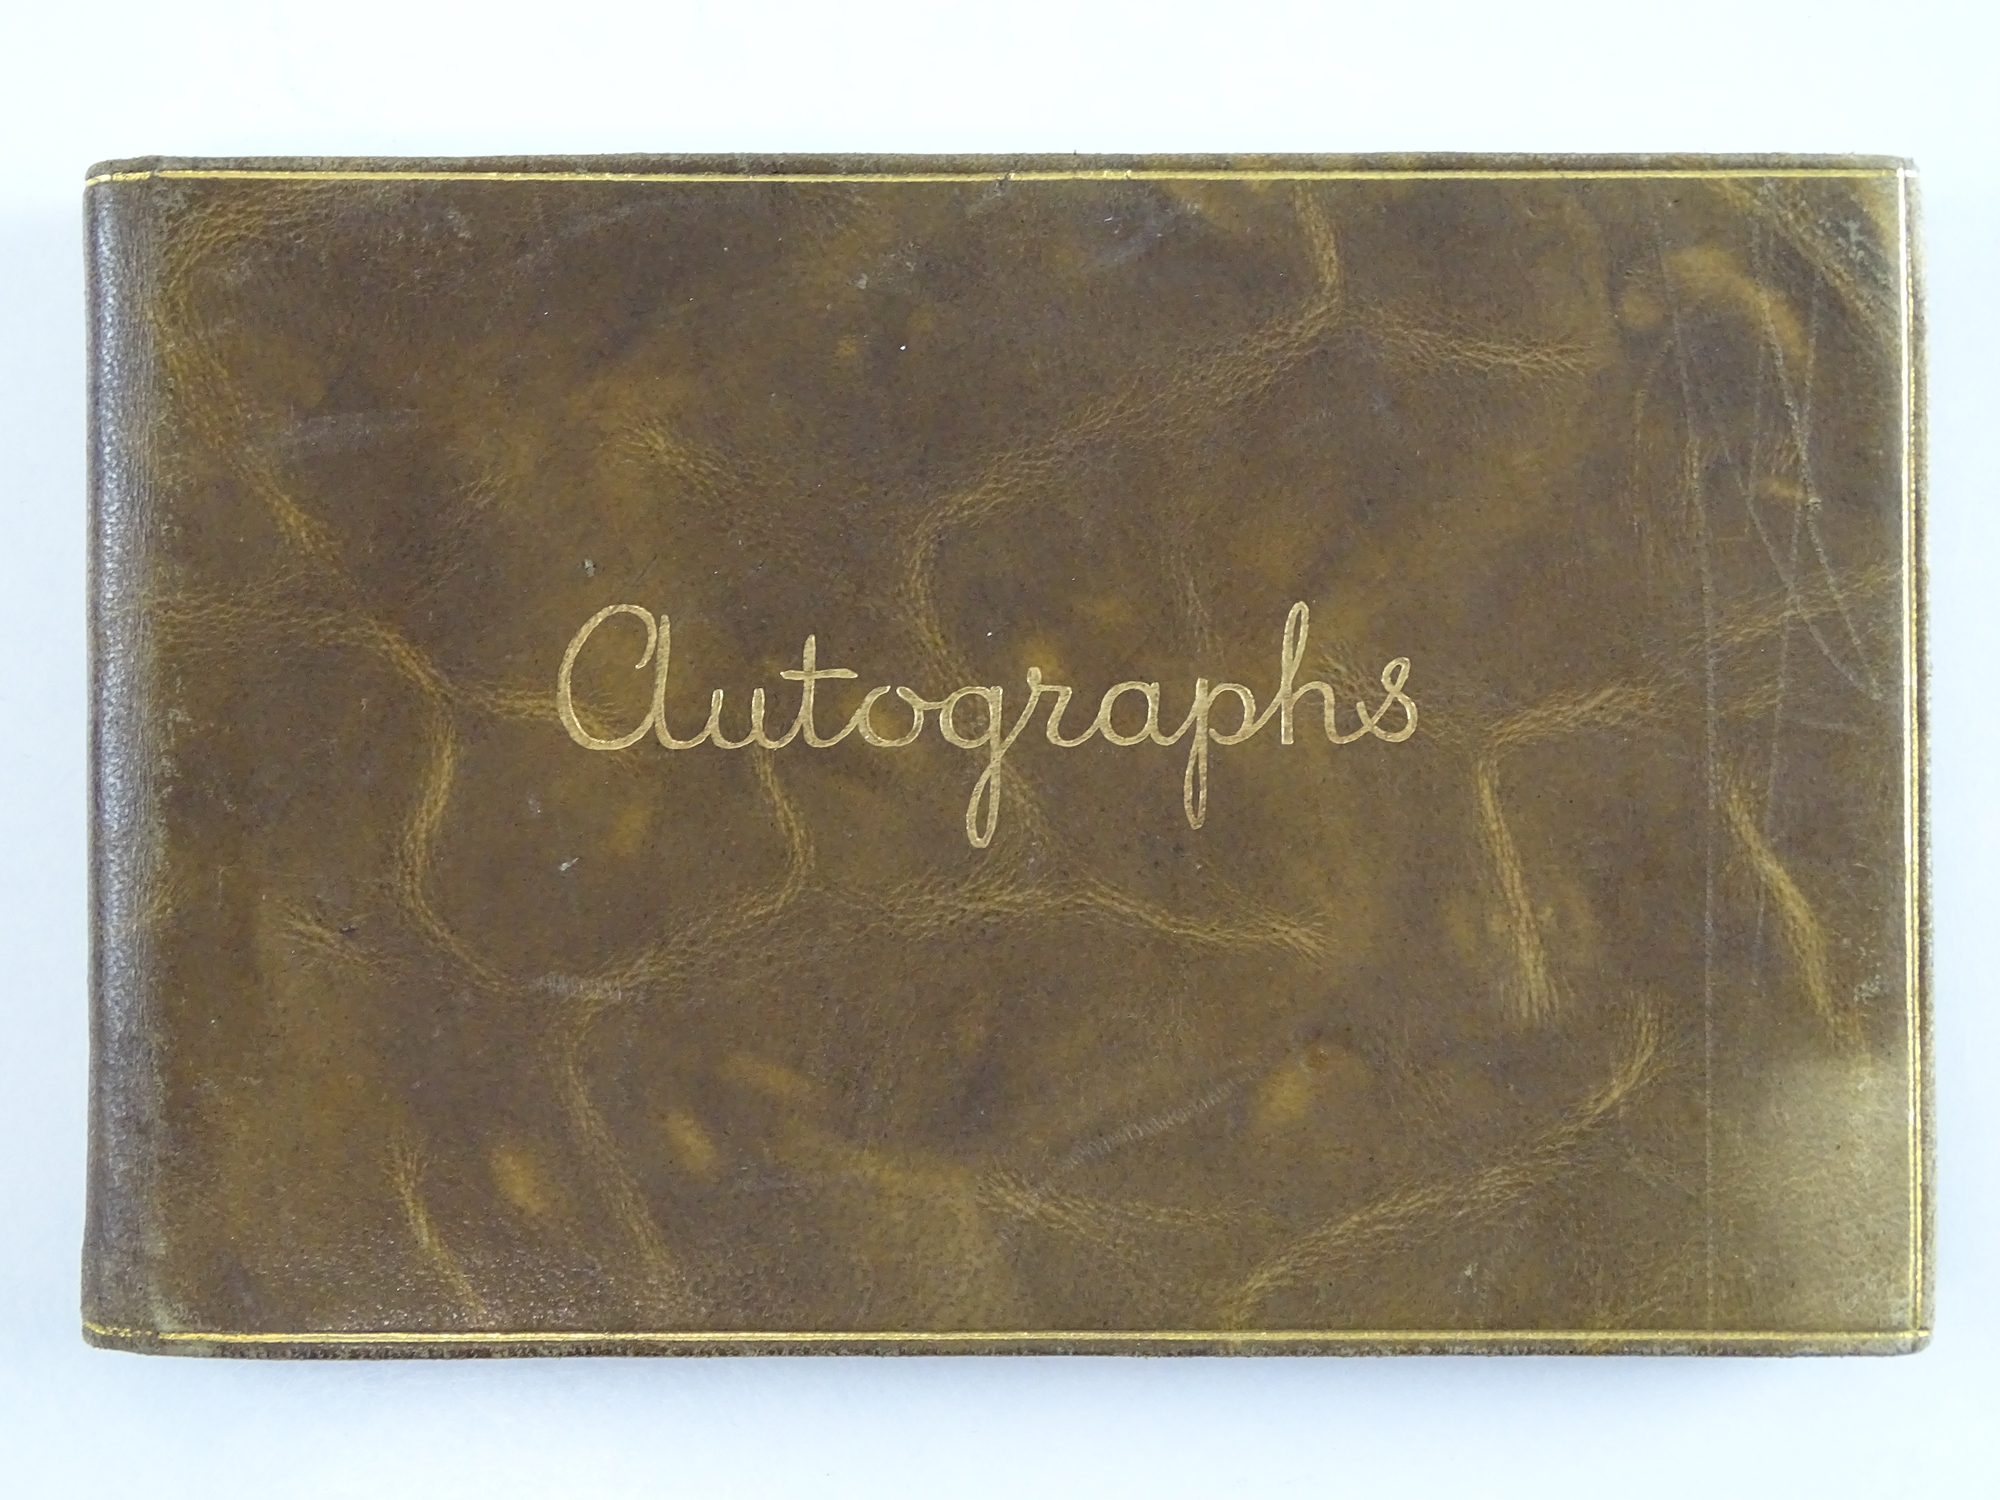 A vintage autograph book containing a NOEL COWARD autograph in addition to many other unknown